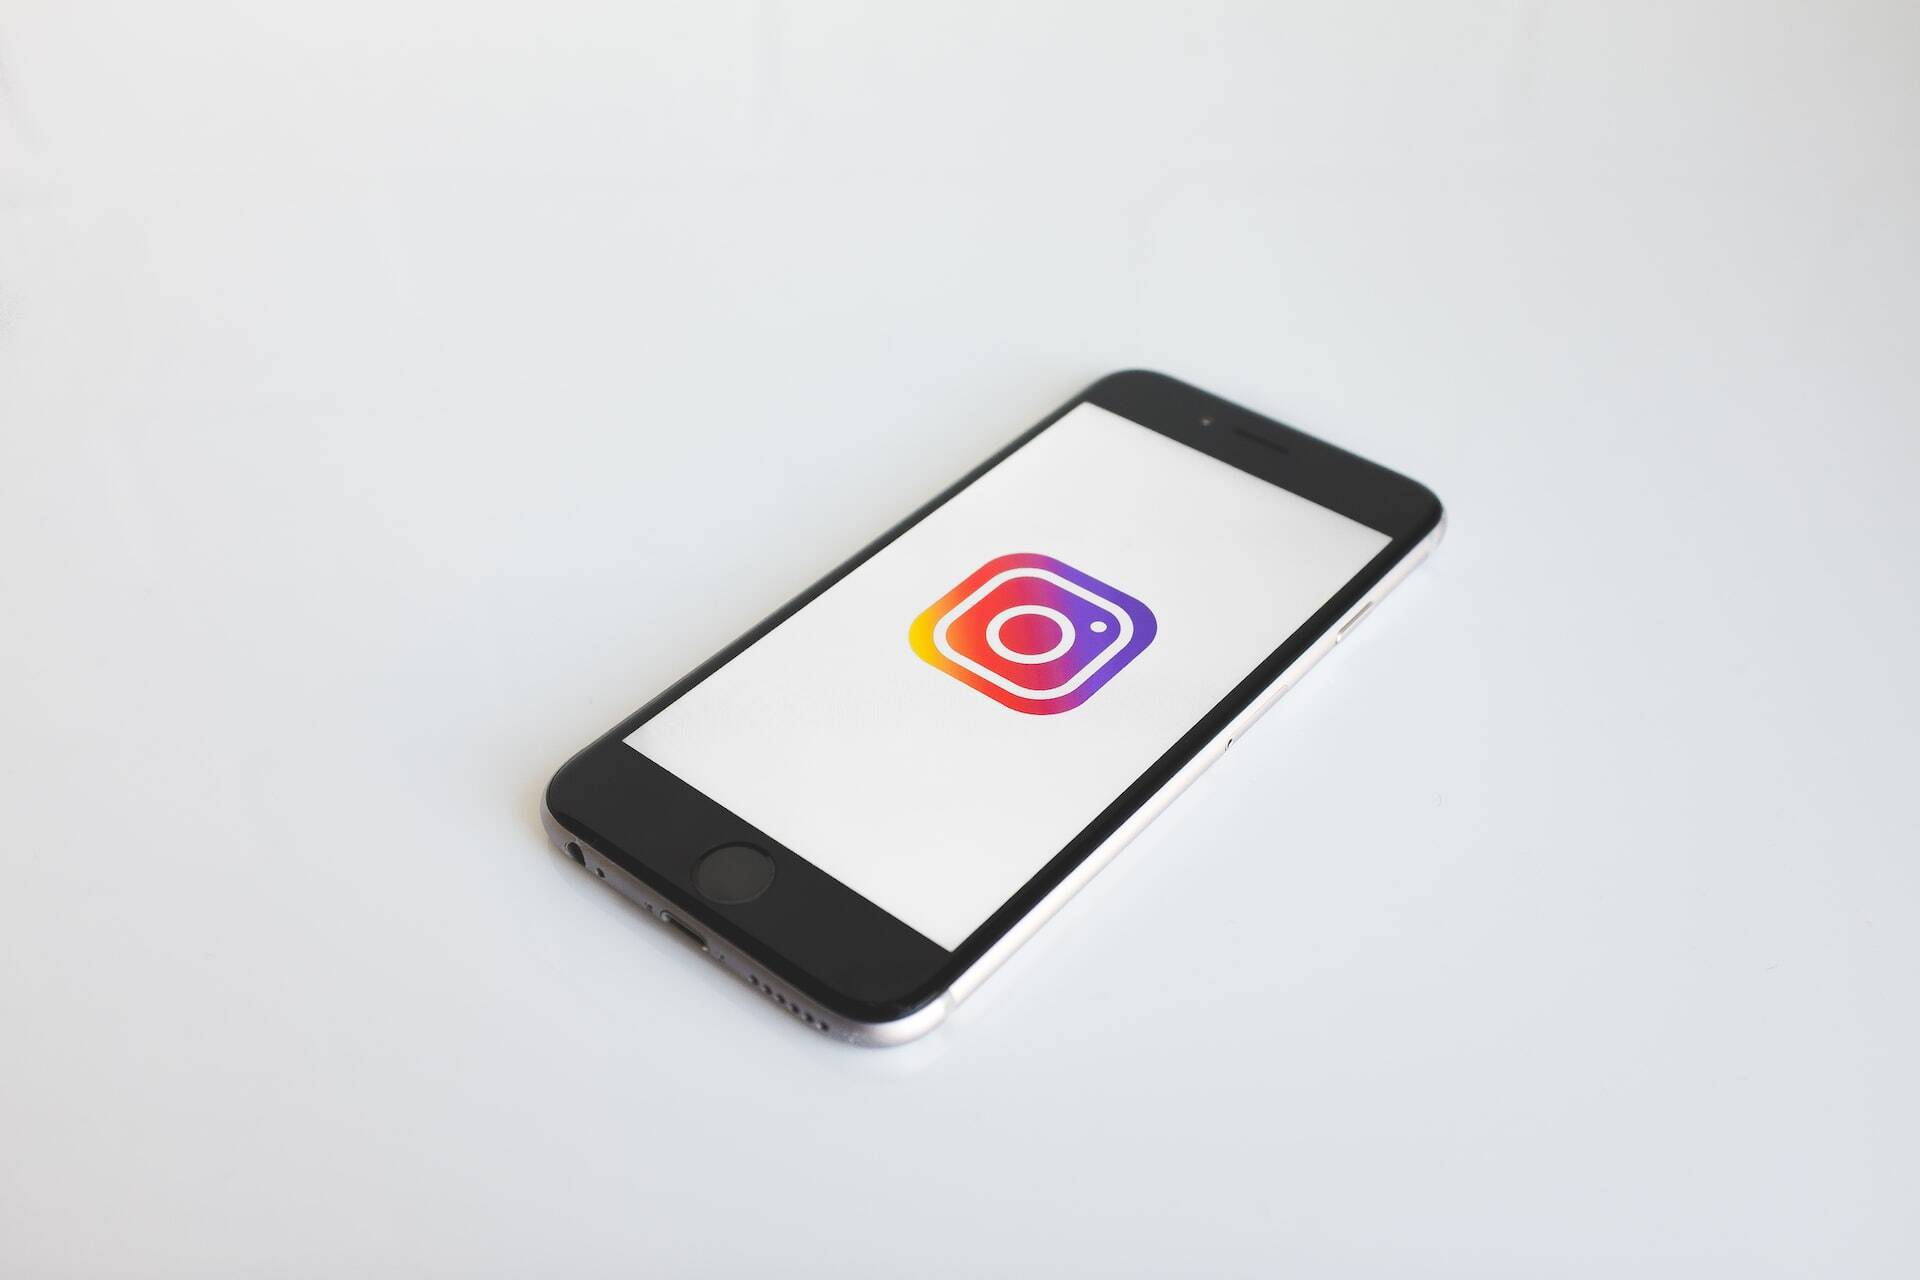 Two exciting new updates from Instagram HQ